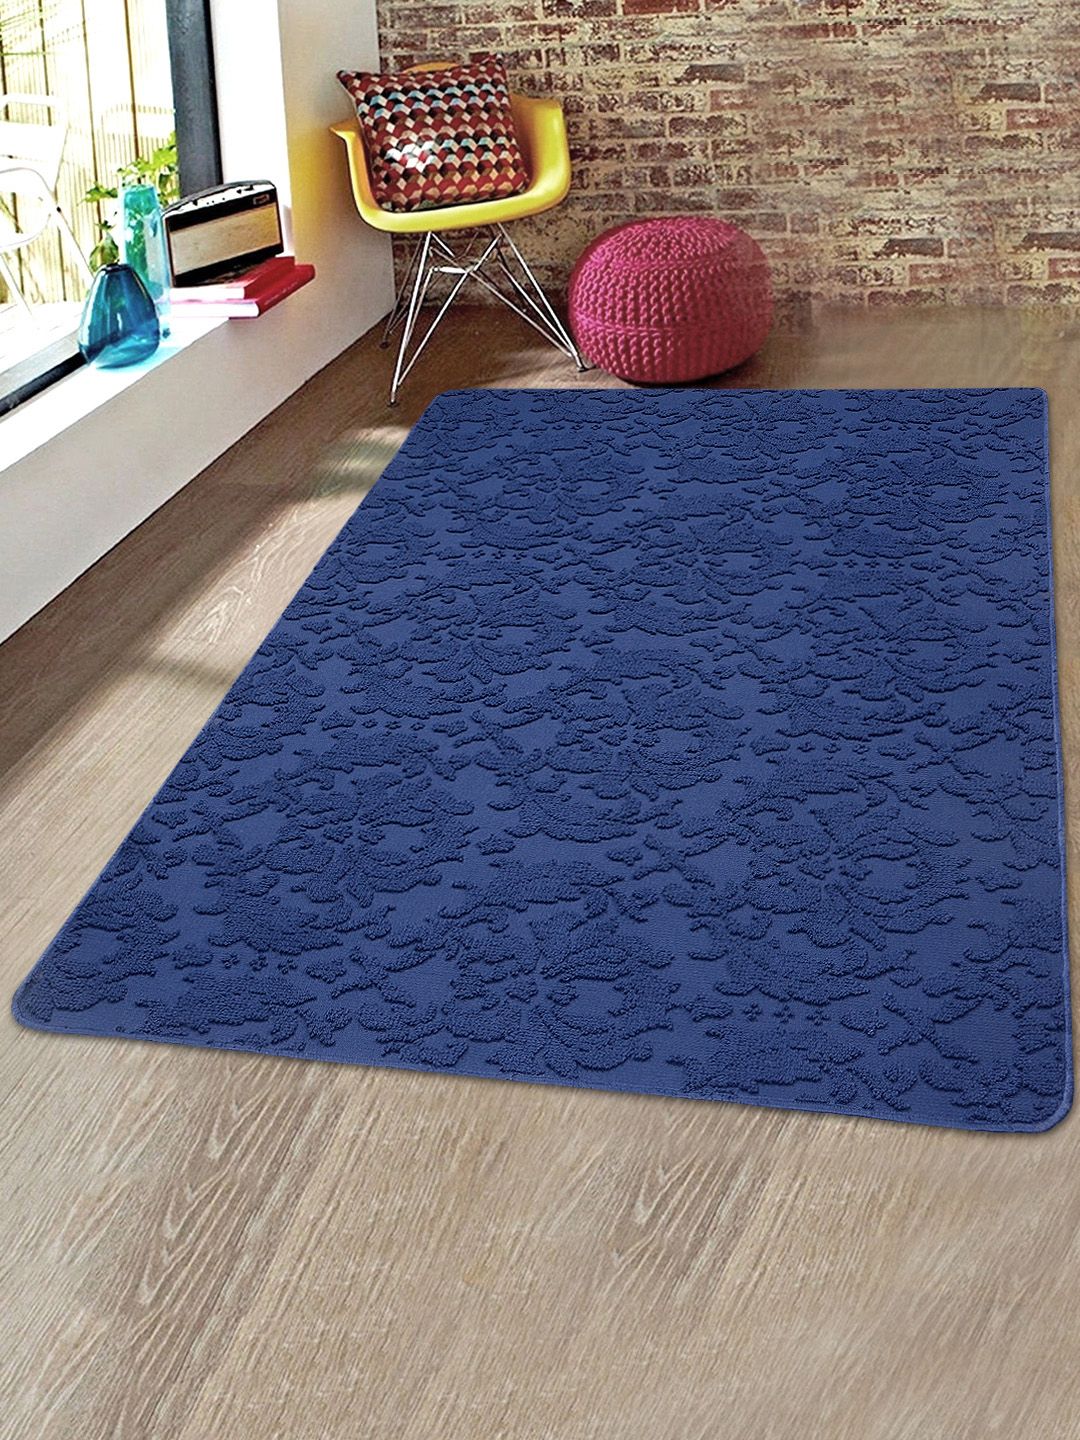 Saral Home Blue Floral Patterned Microfiber Anti-Skid Carpet Price in India